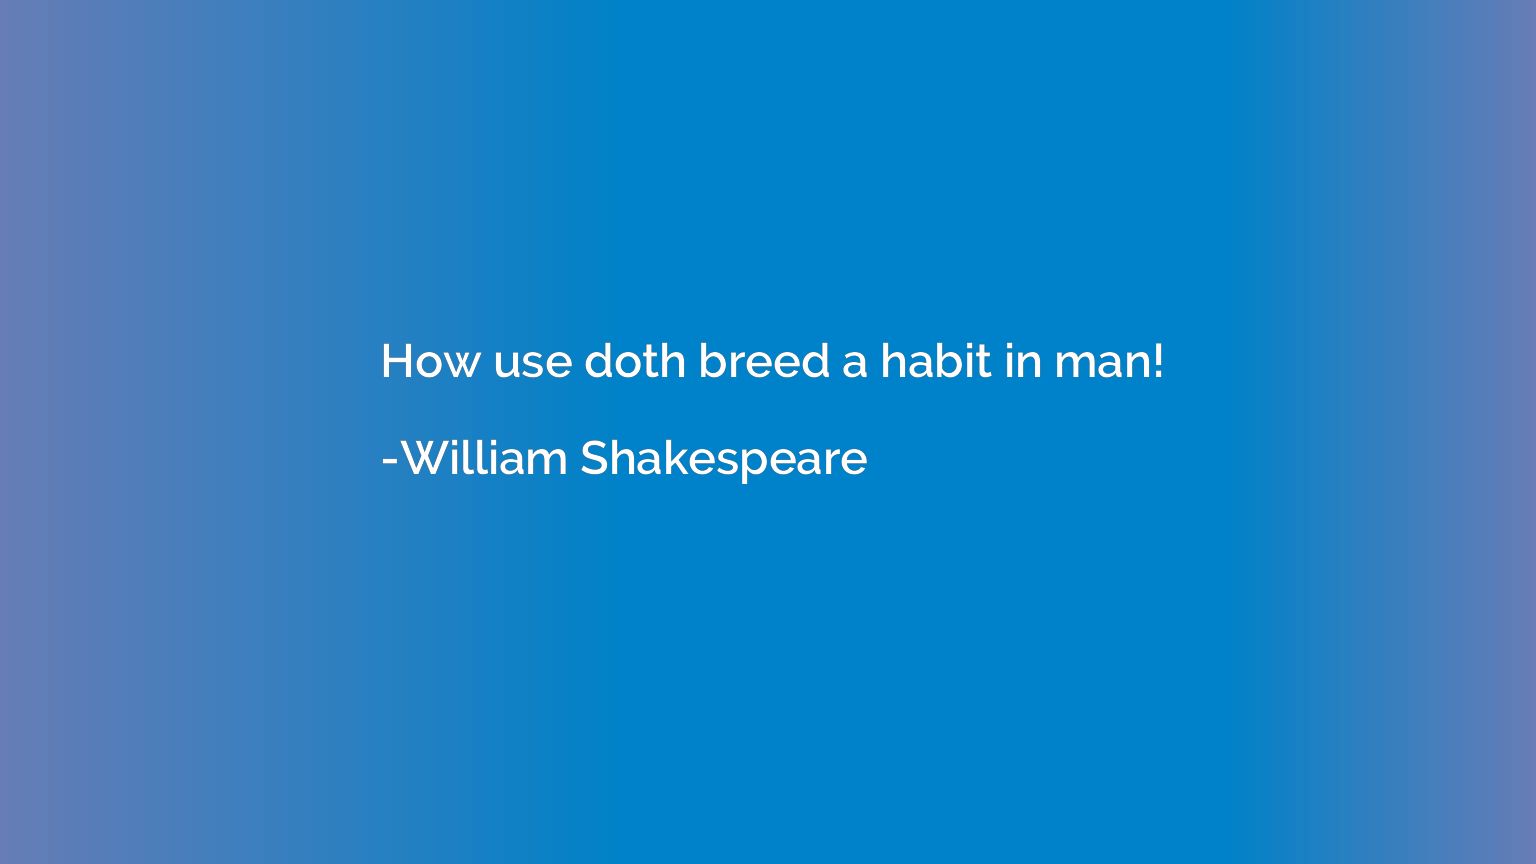 How use doth breed a habit in man!